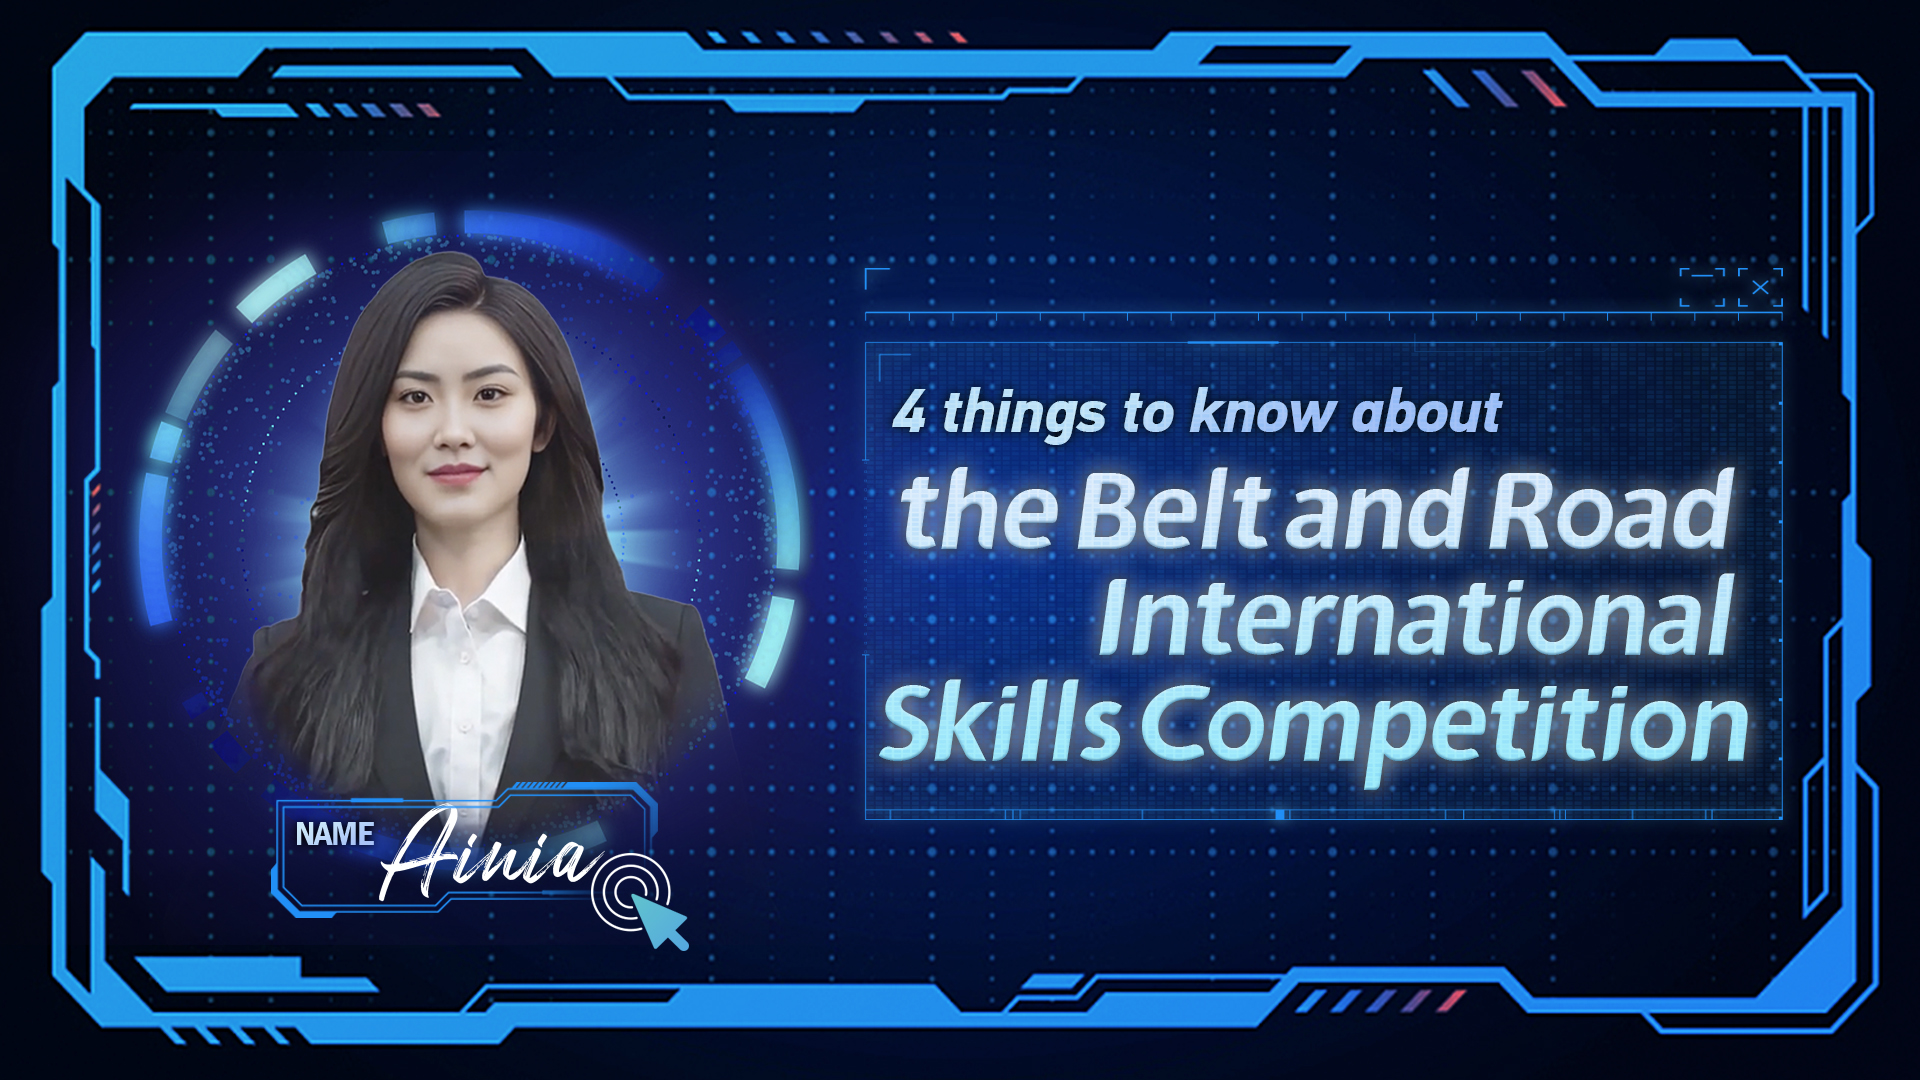 4 things to know about Belt and Road International Skills Competition